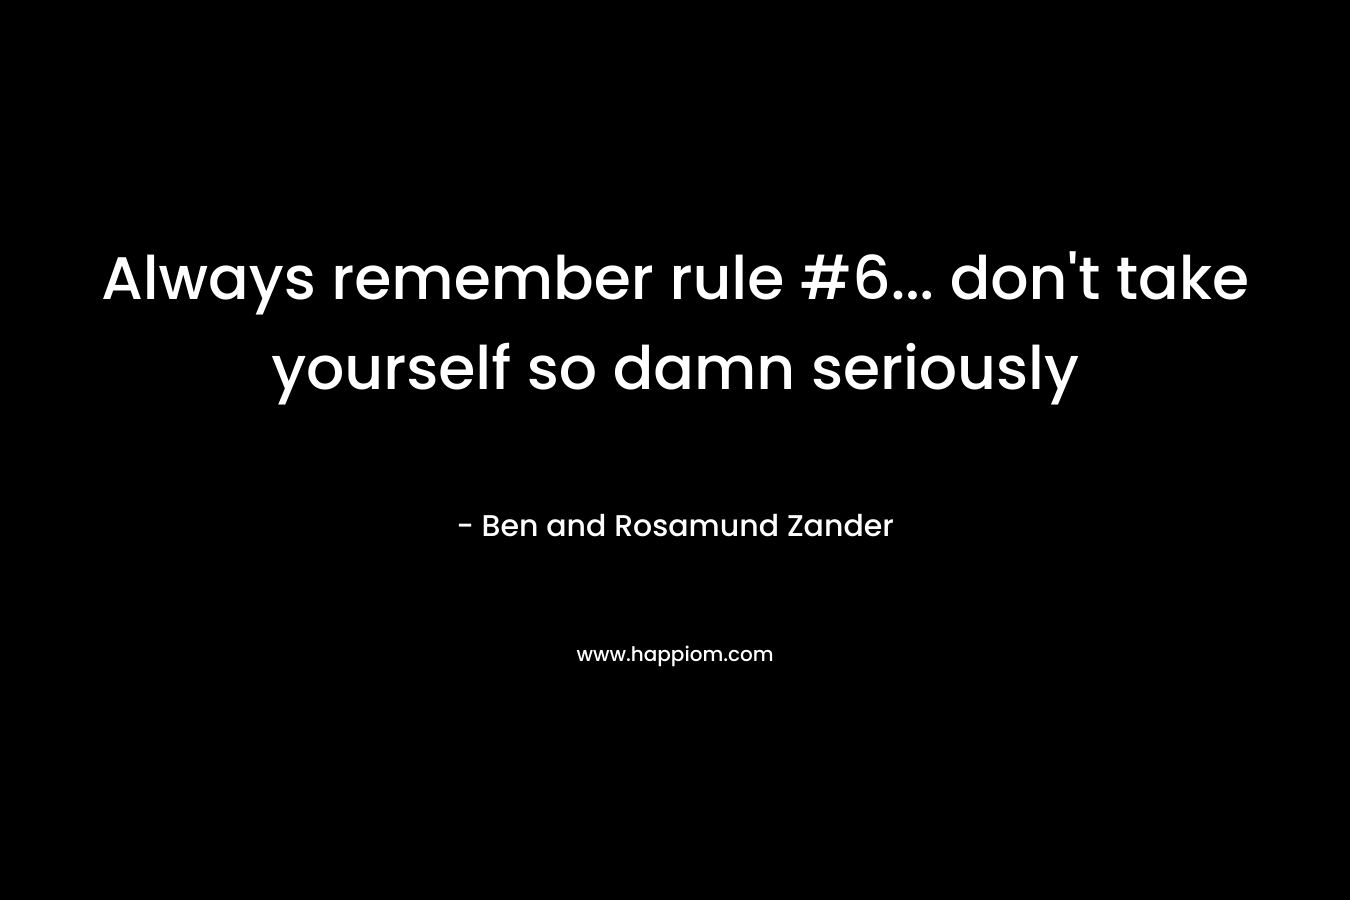 Always remember rule #6... don't take yourself so damn seriously